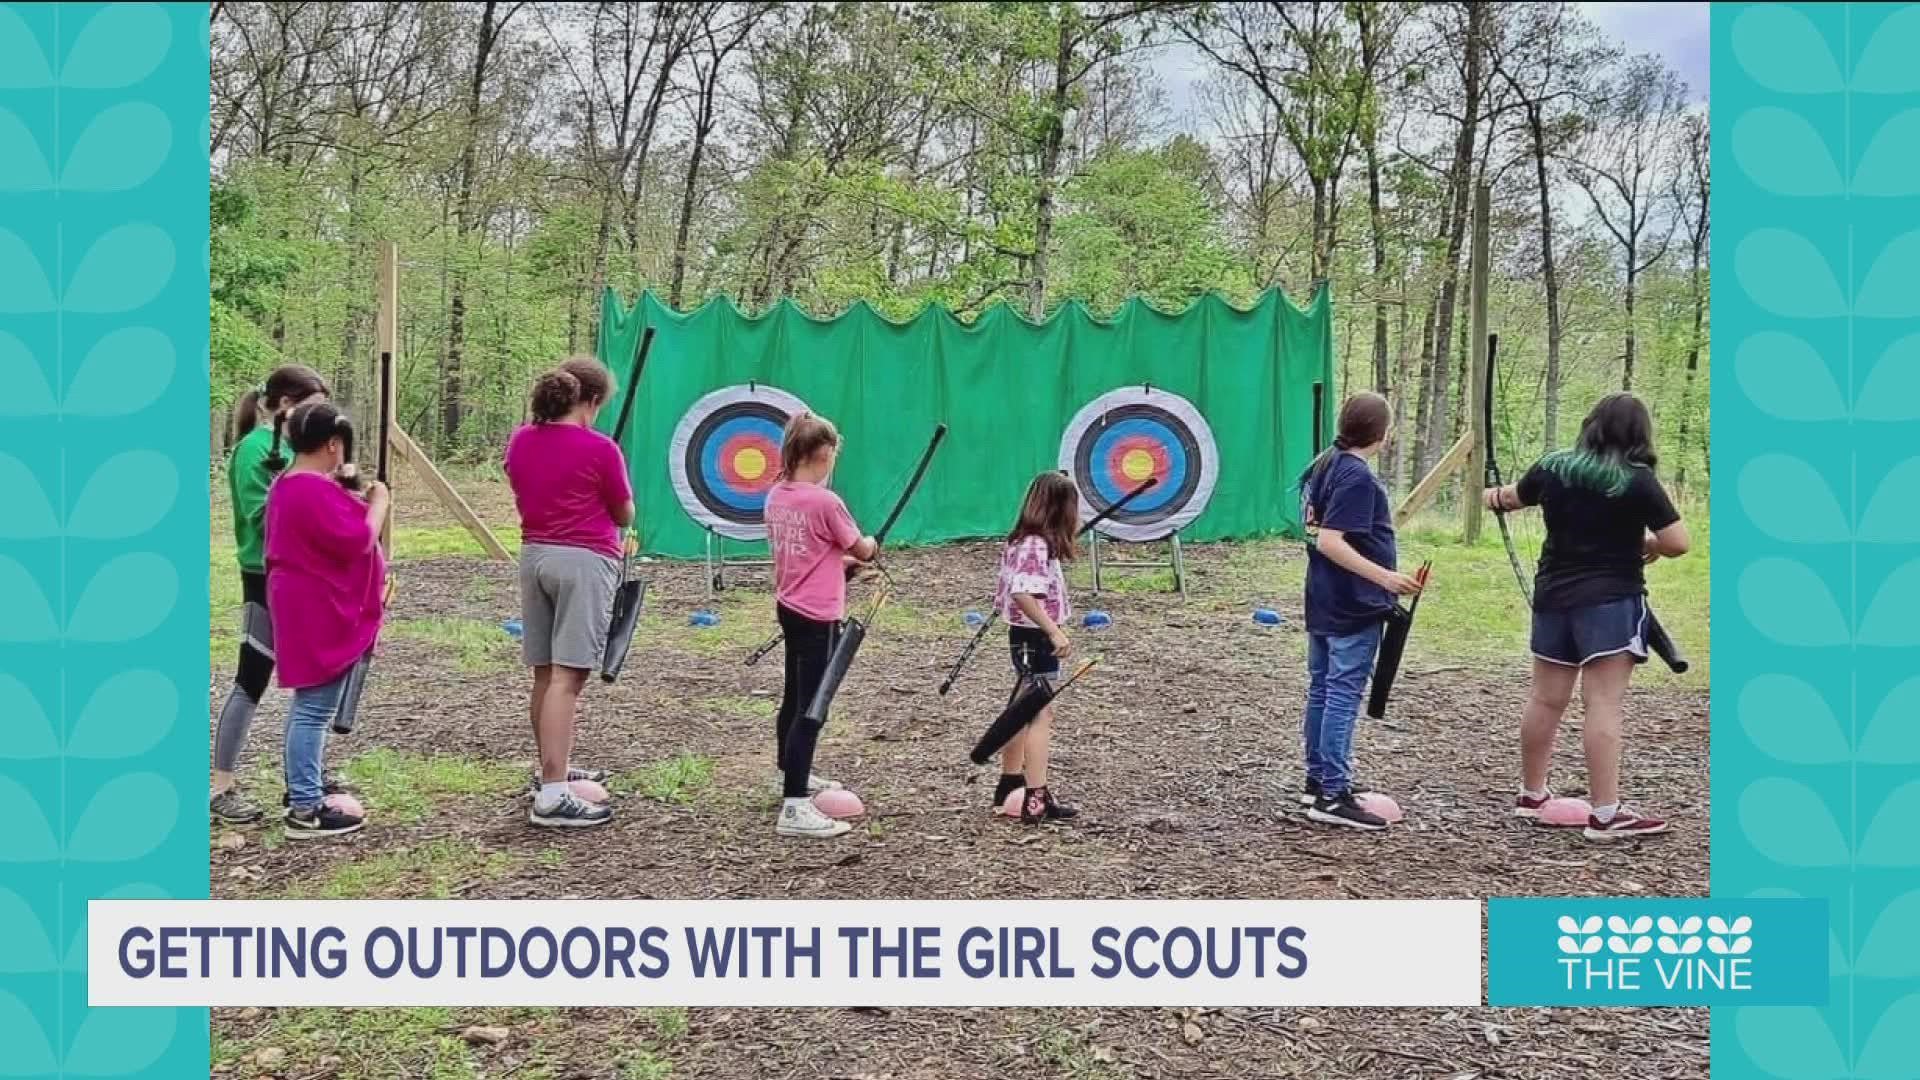 Learn more at girlscoutsdiamonds.org!